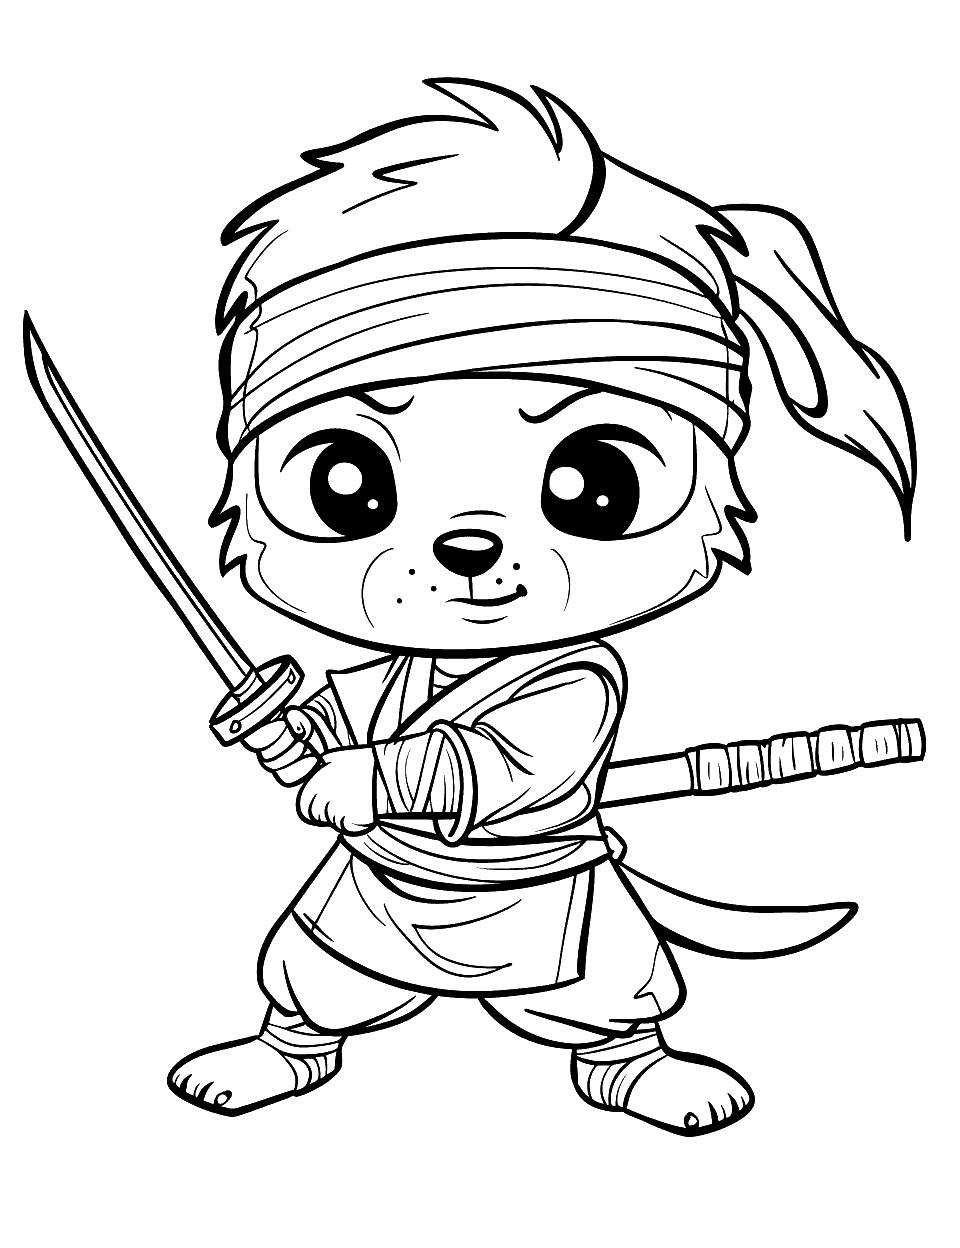 Cute Ninja Puppy Coloring Page - A puppy dressed in a ninja costume, holding a tiny katana.